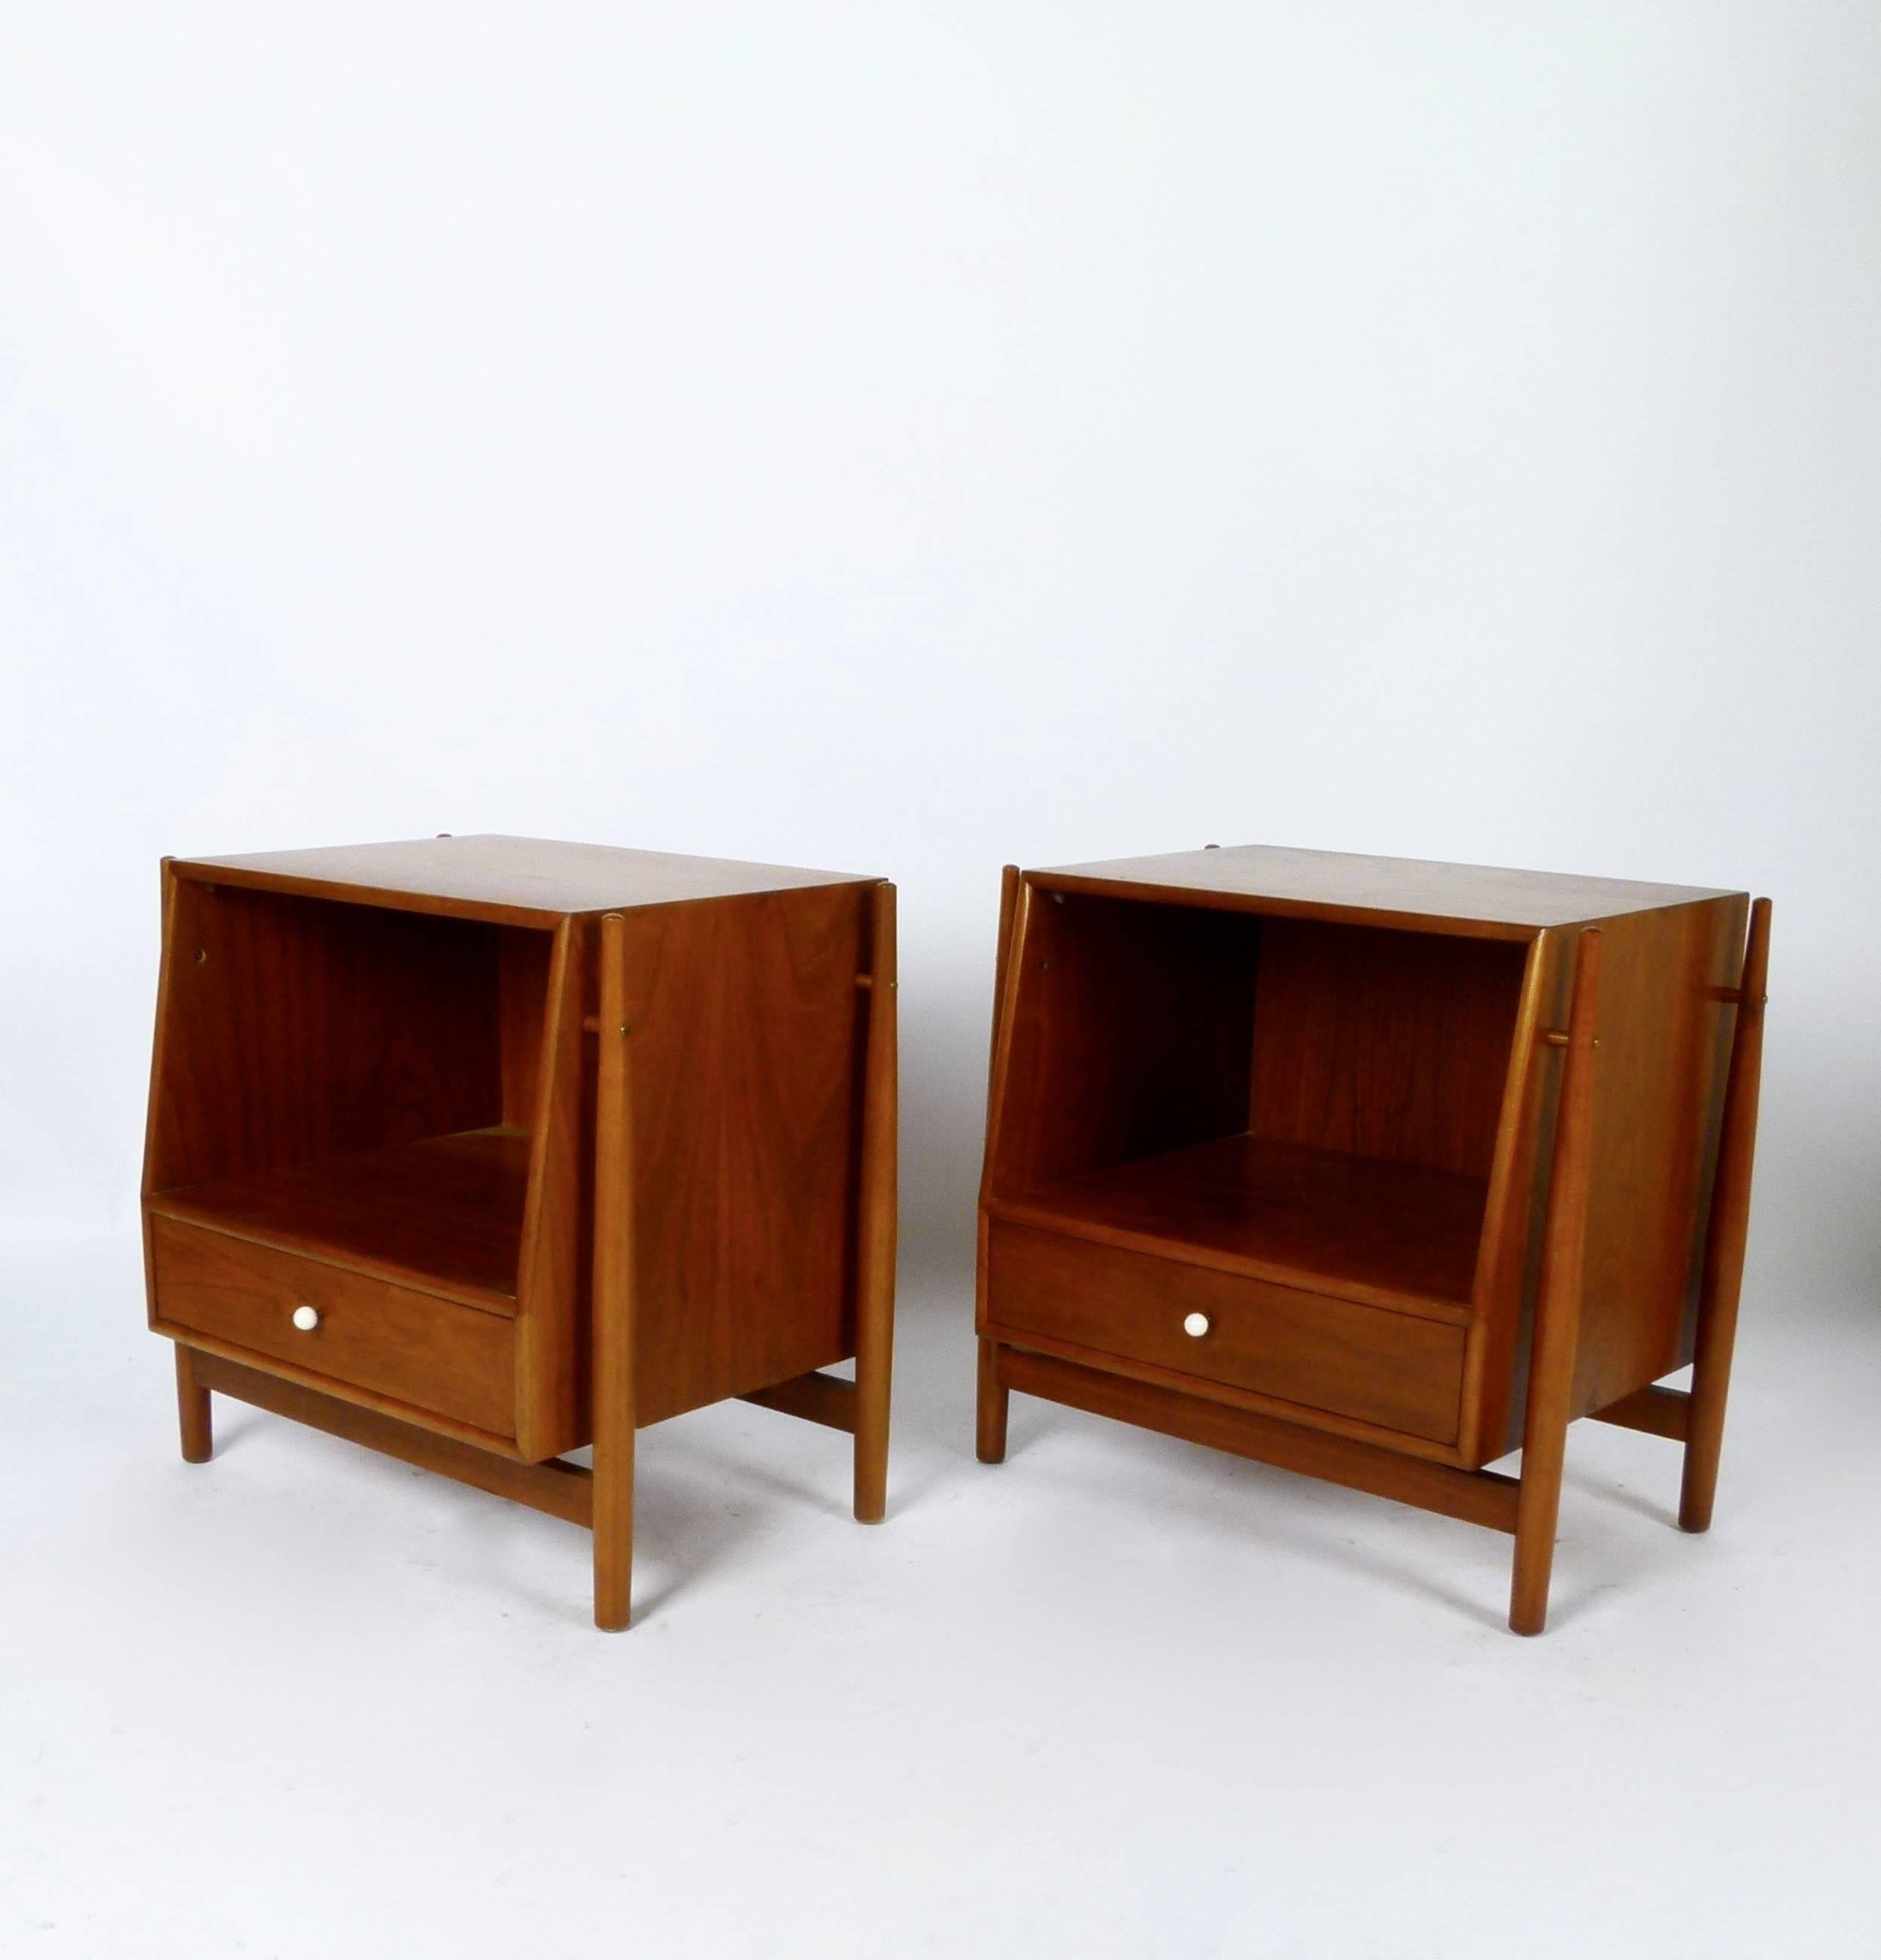 Pair of 1965 one drawer nightstands in walnut with porcelain pulls by Kipp Stewart for Drexel's Declaration line.